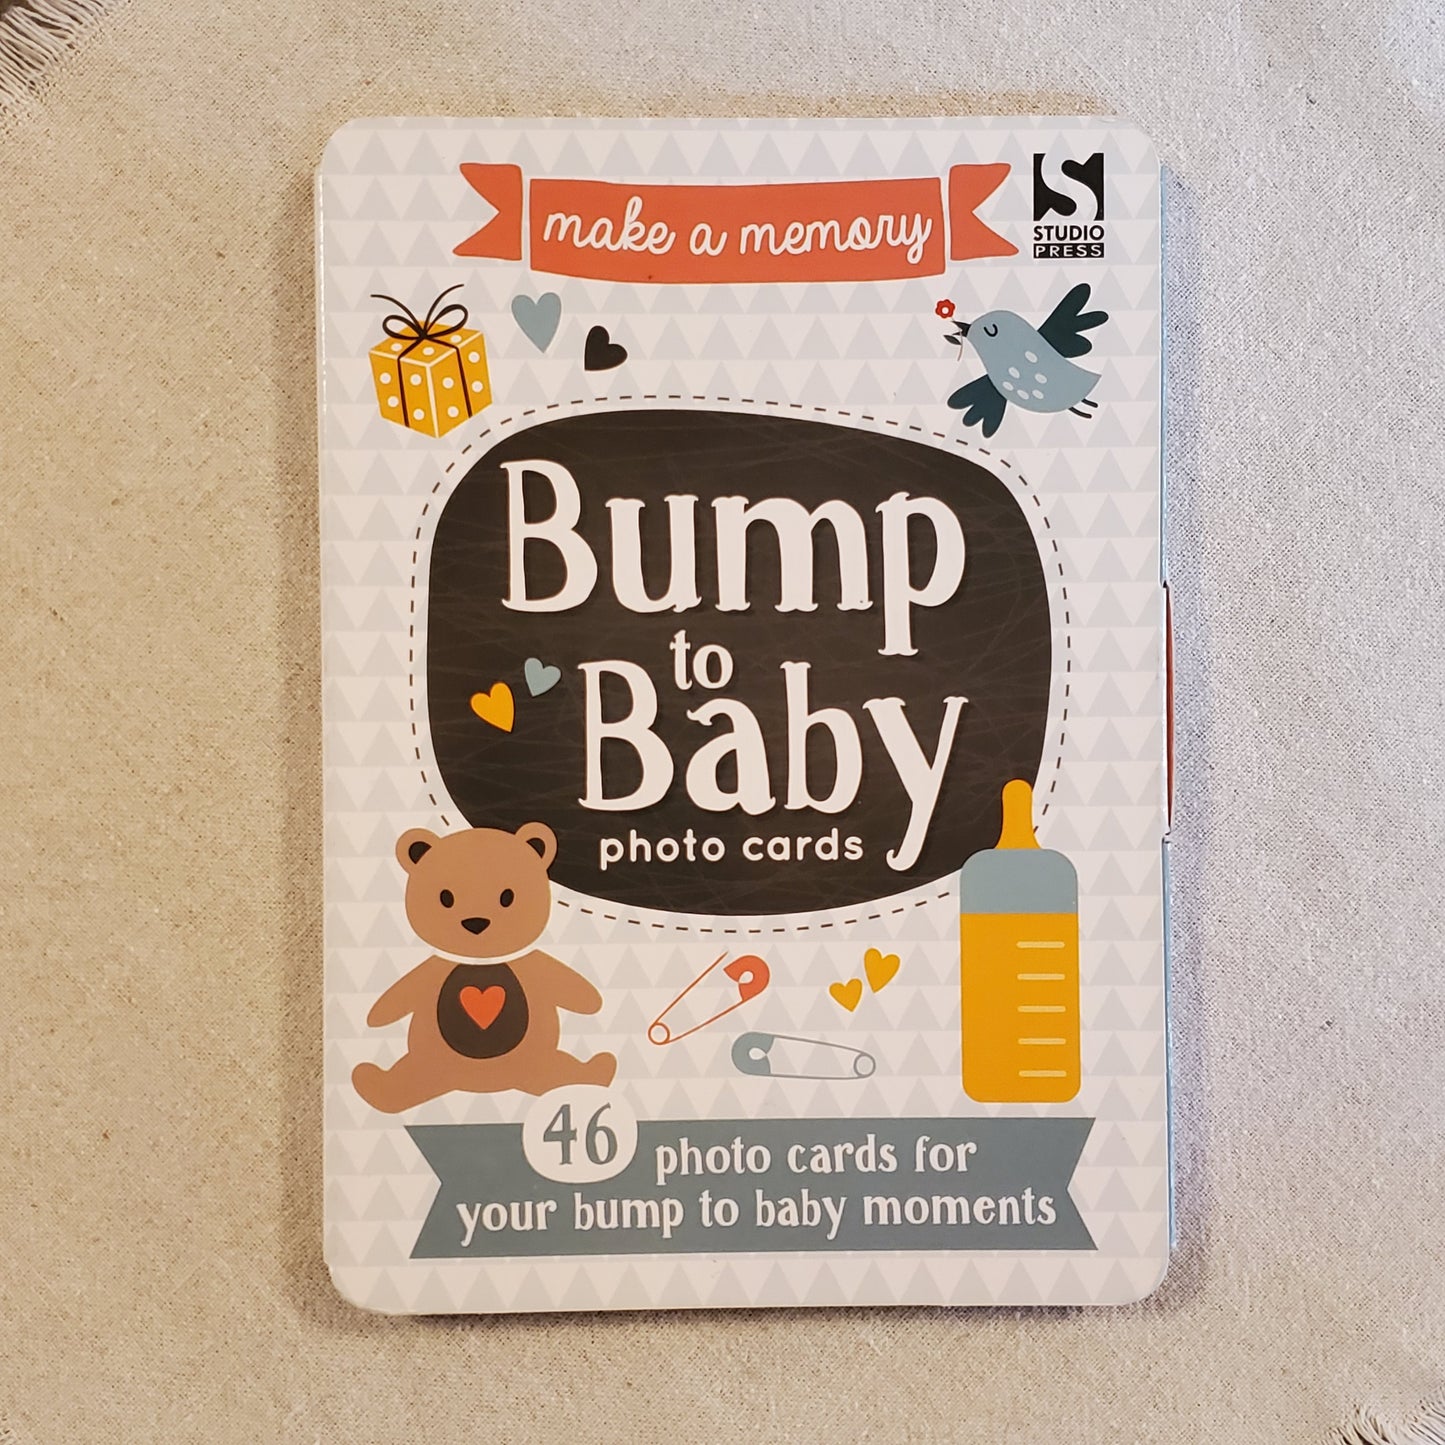 GB Bump to Baby Photo Cards (make a memory)